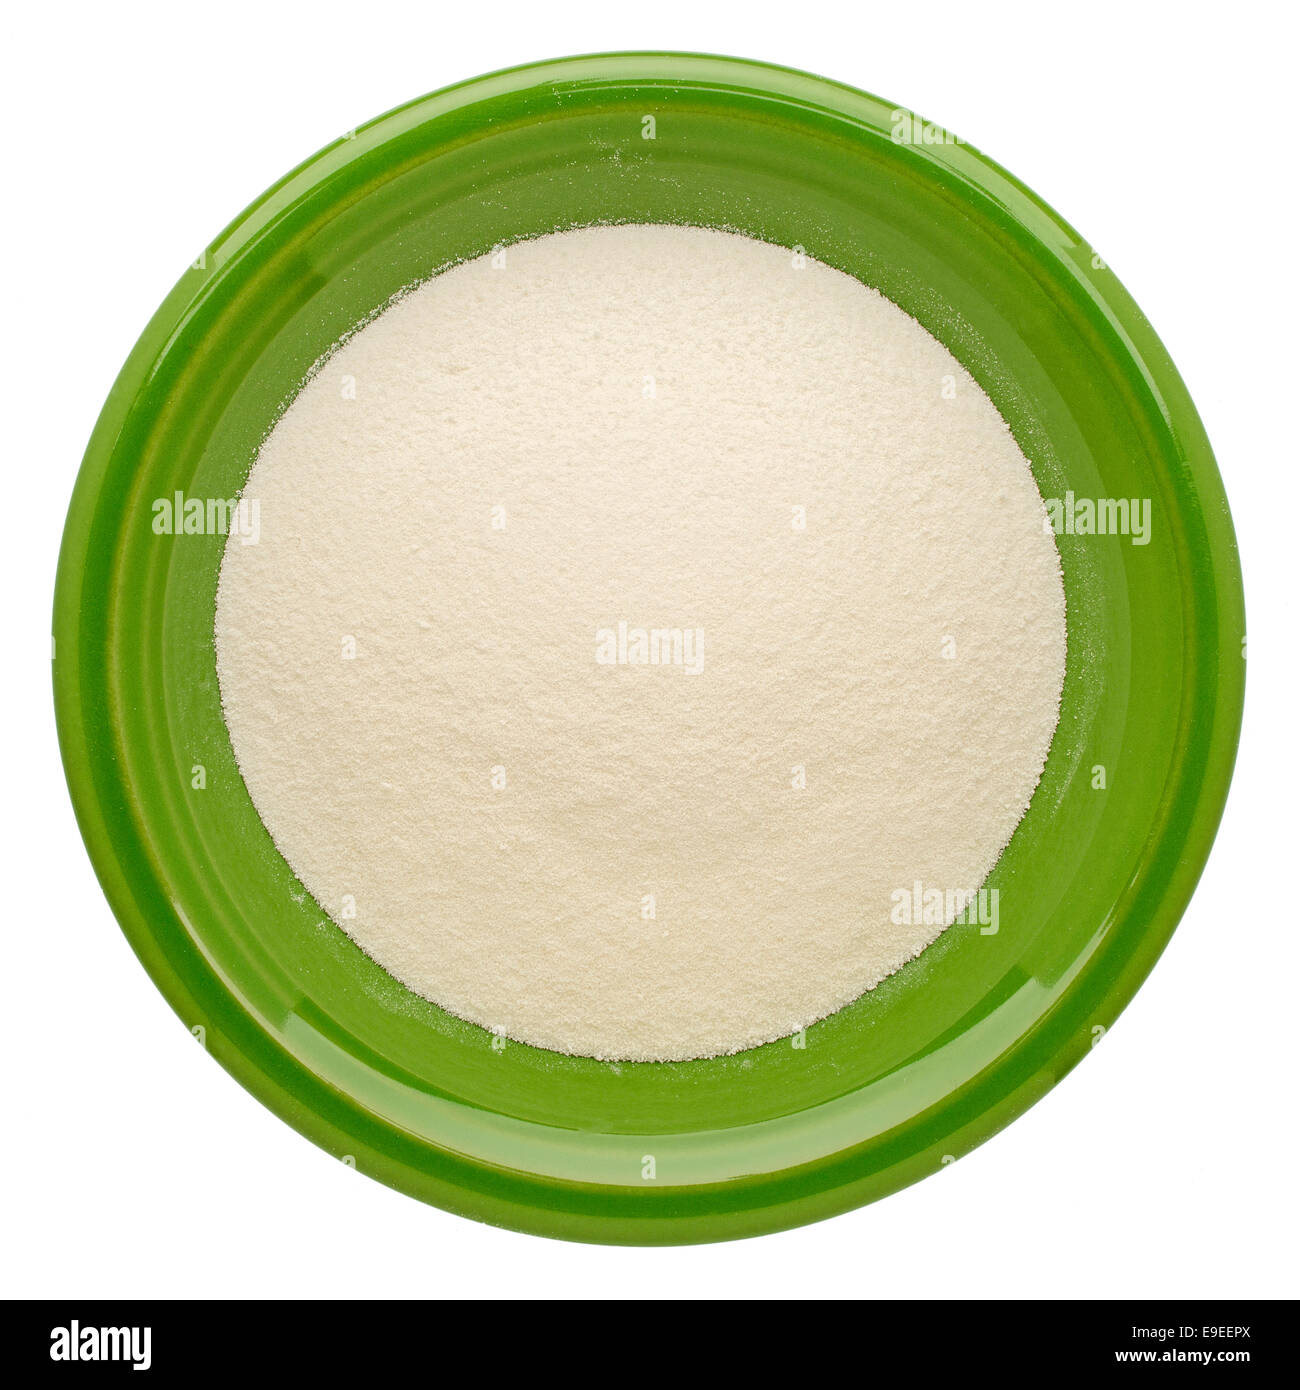 collagen protein powder on an isolated green ceramic bowl, top view Stock Photo